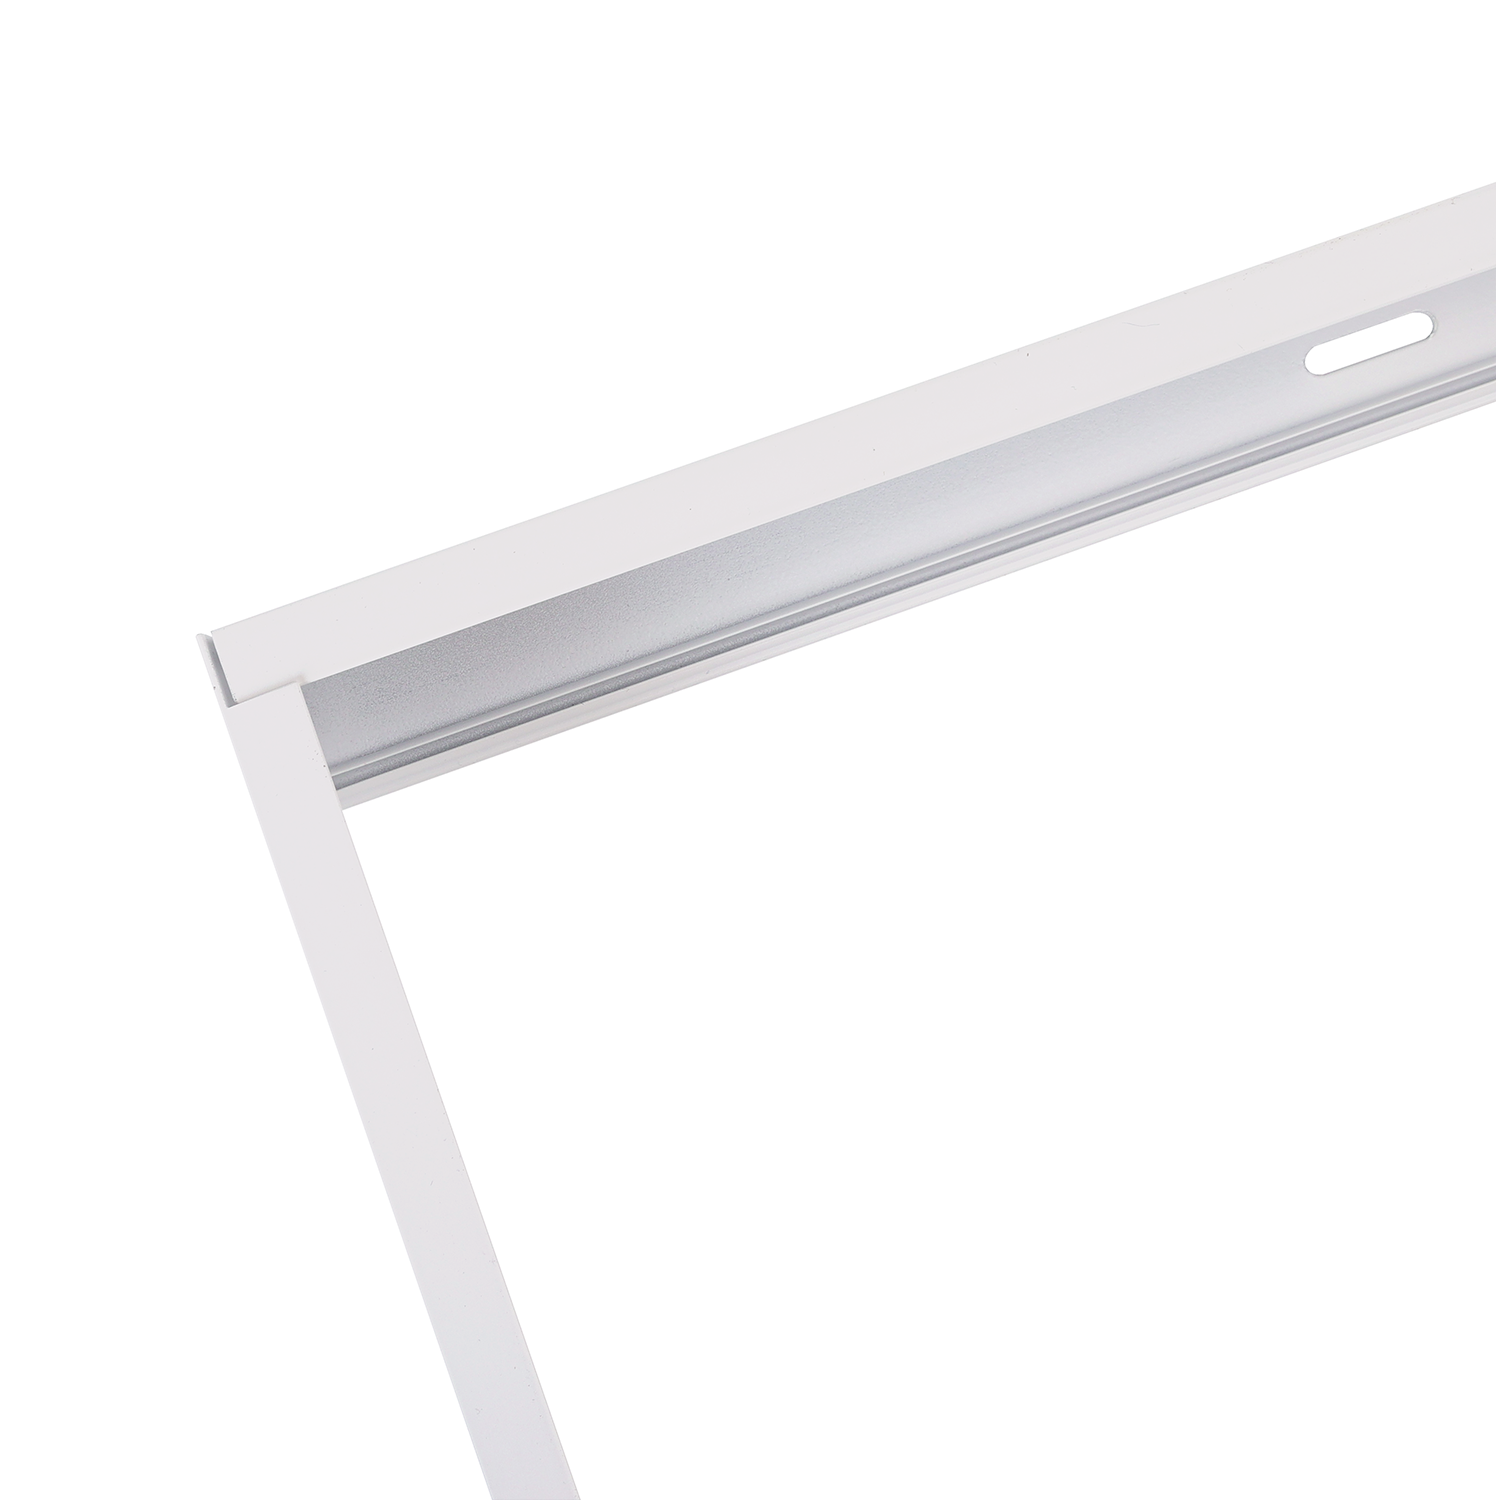 Aigostar Surface mounting frame White L1200*W300*H50mm